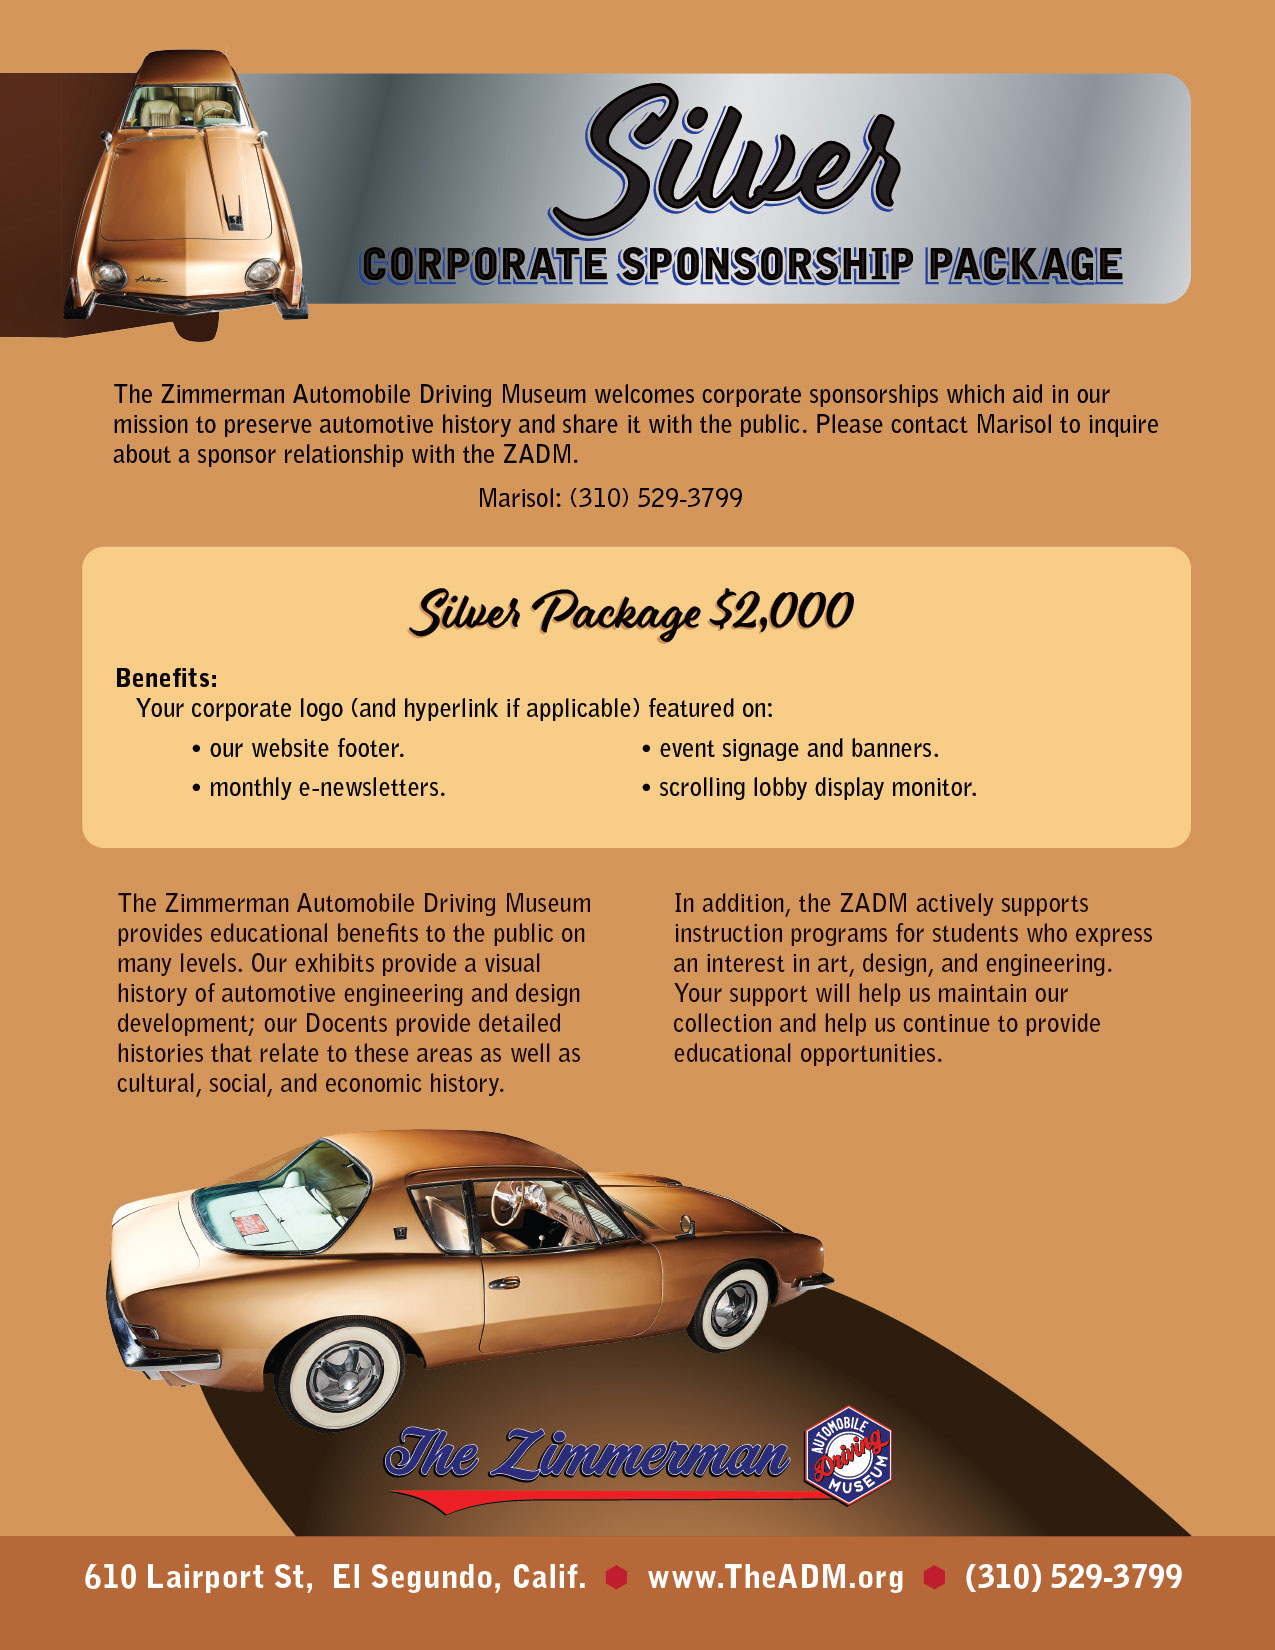 Silver Corporate Sponsorship Package